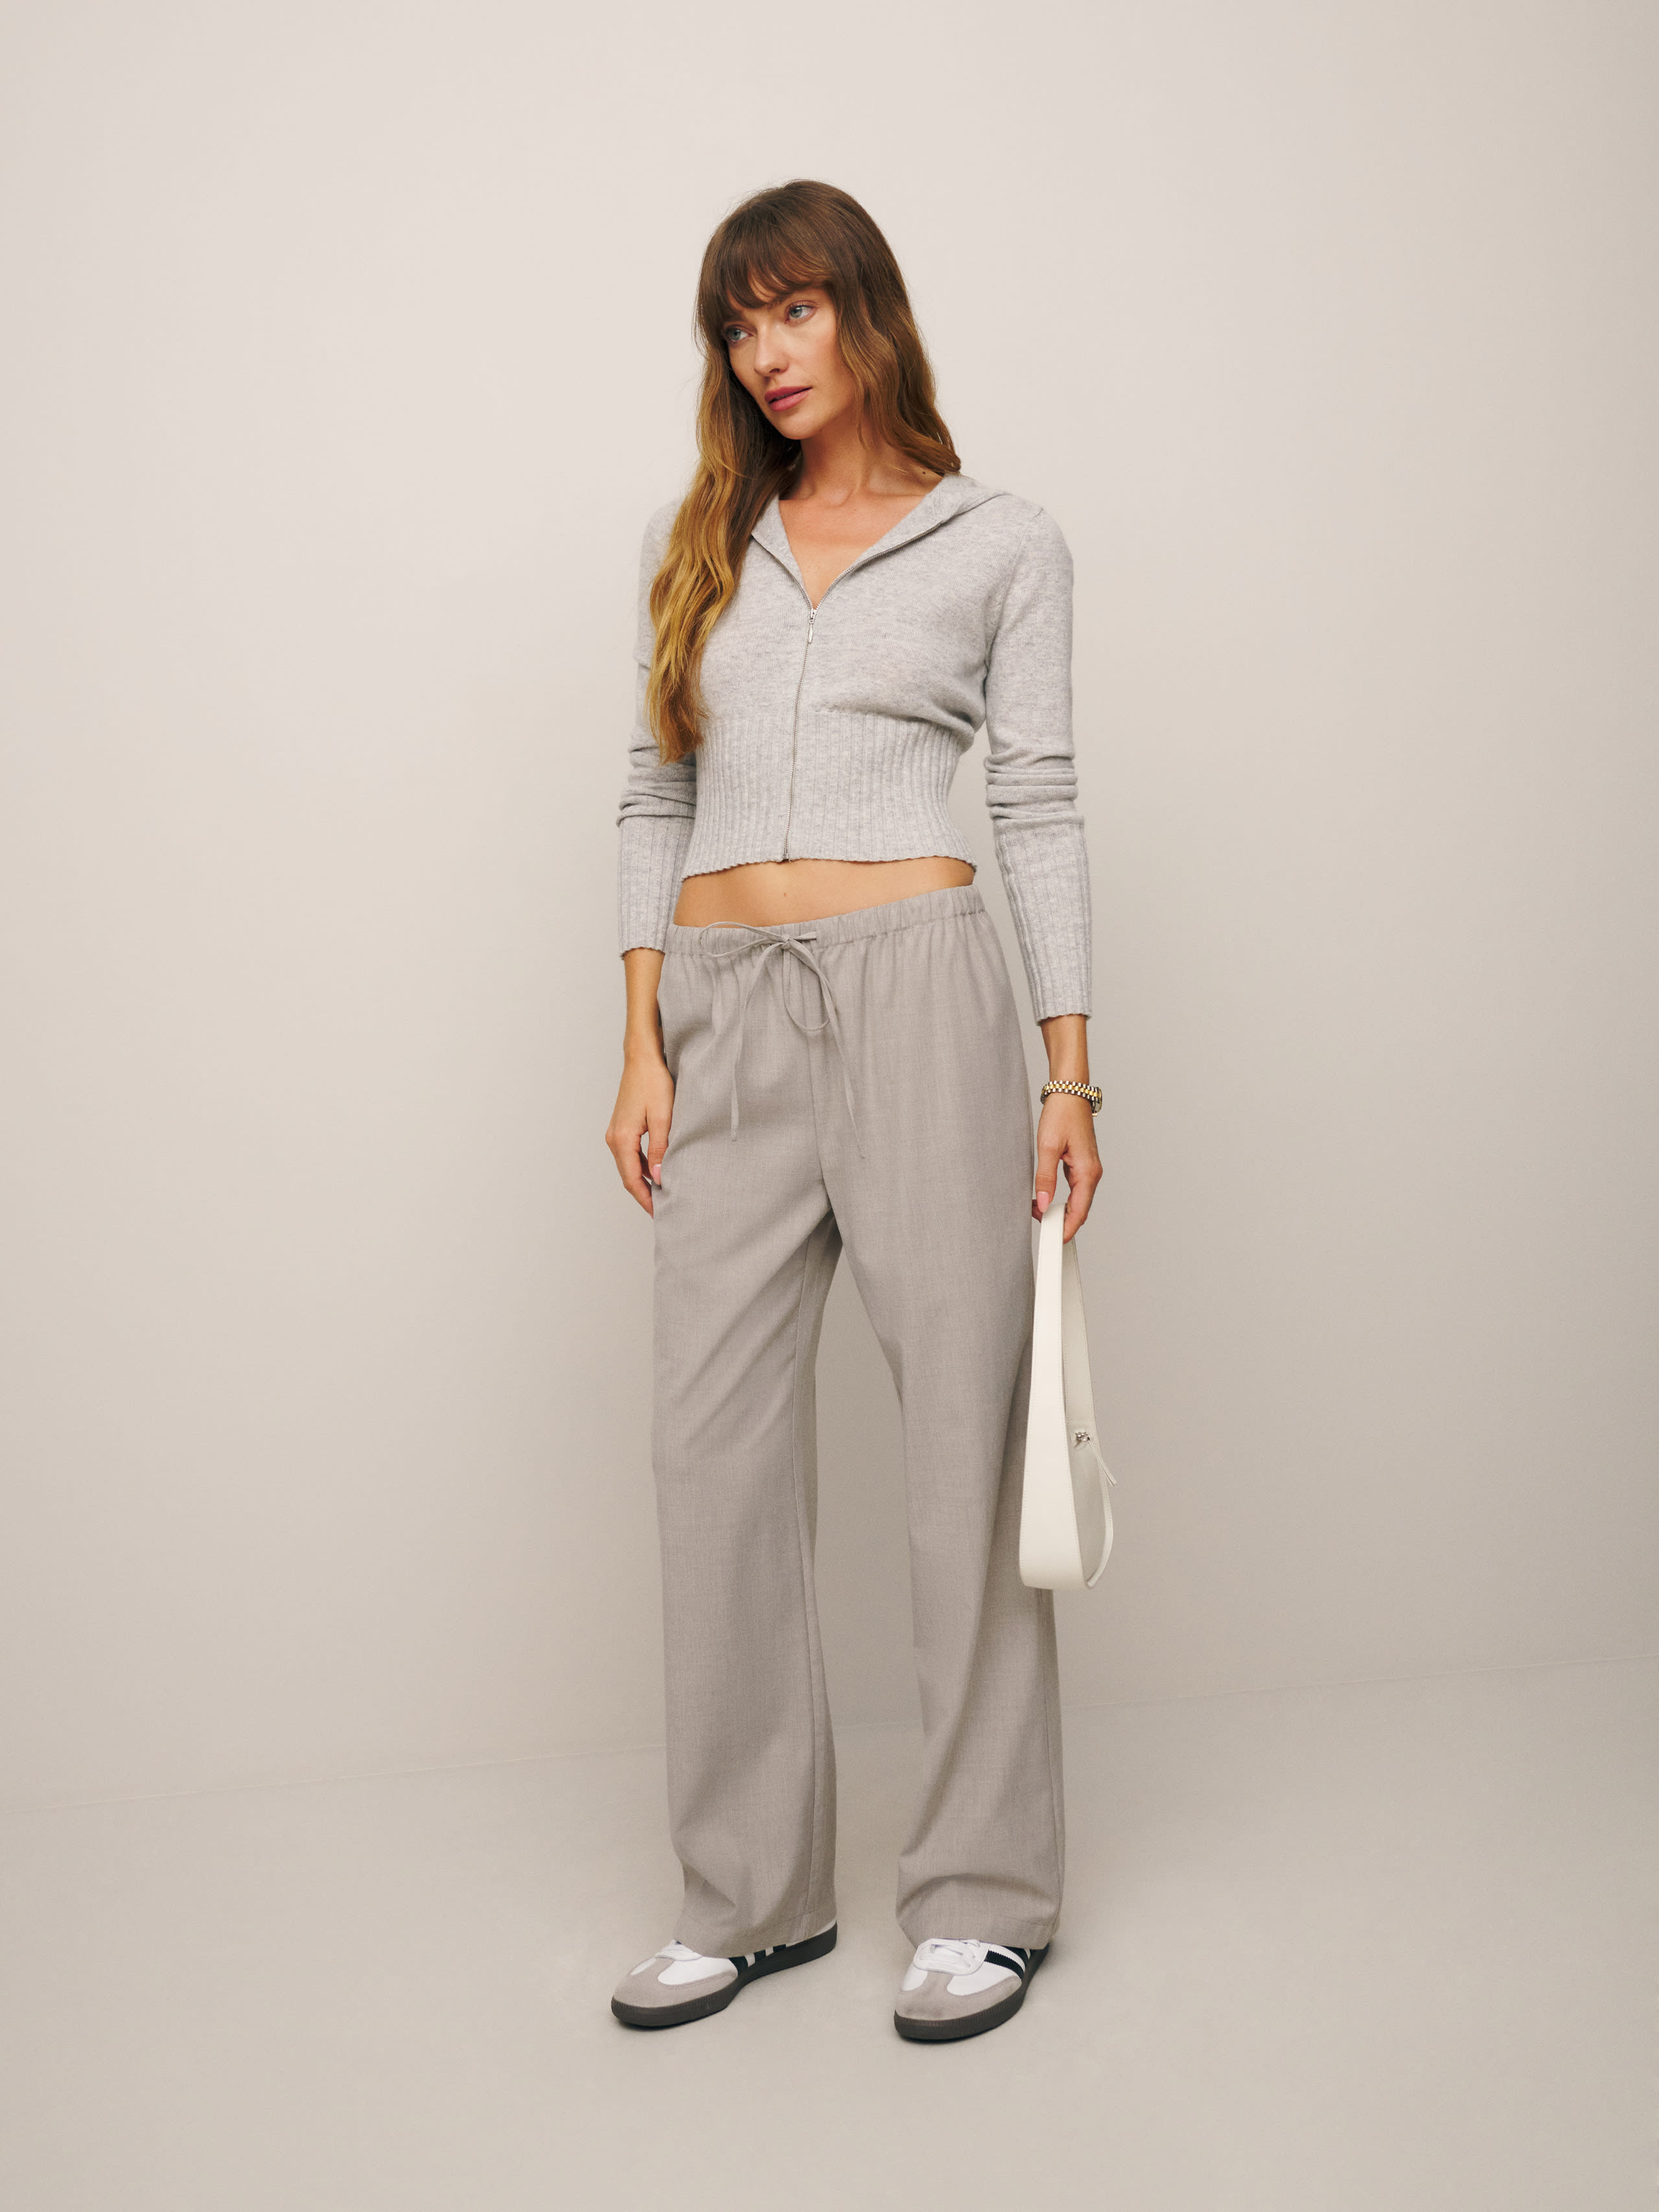 Reformation Olina Trouser In Natural